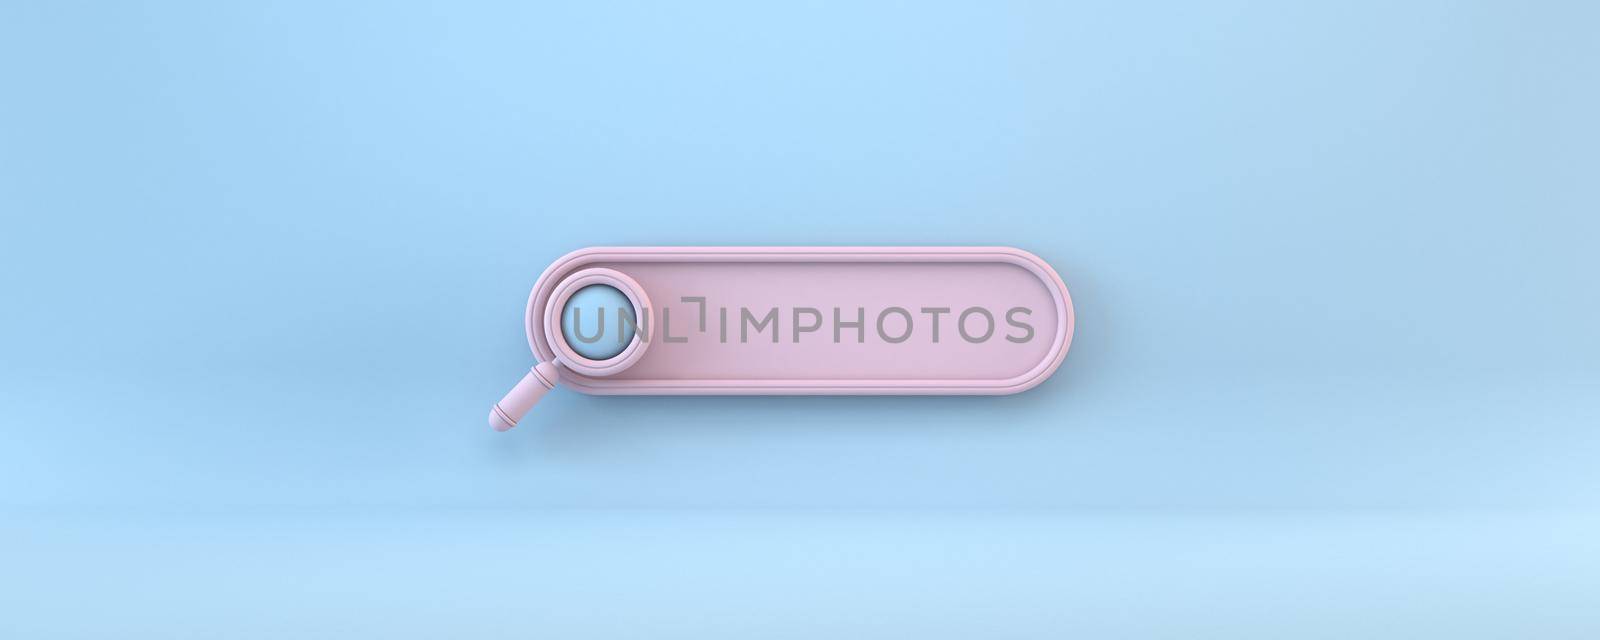 Pink search bar 3D rendering illustration isolated on blue background